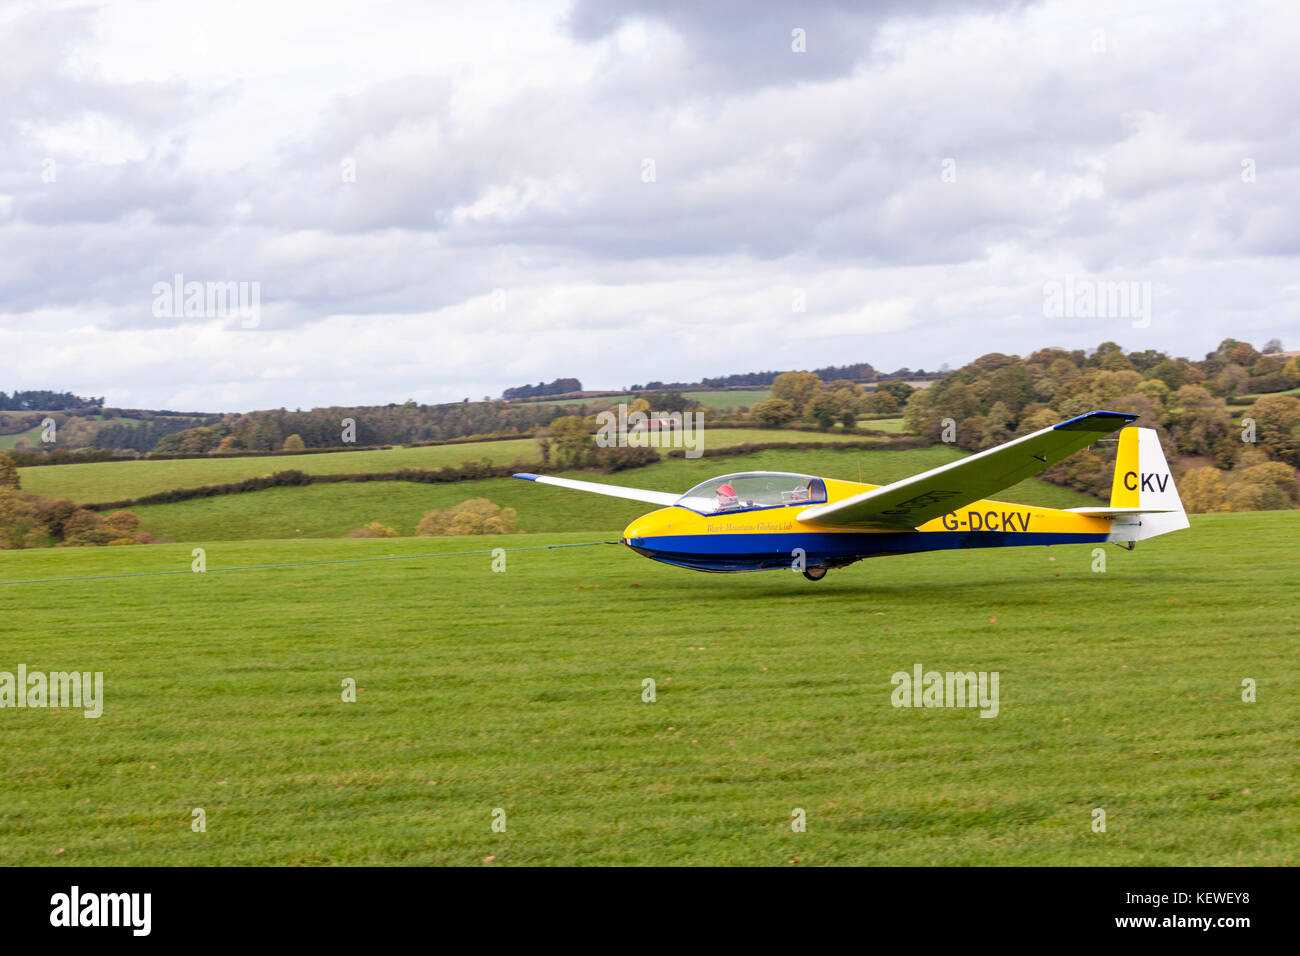 A glider being towed up by tug at the Black Mountains Gliding Club on the Brecon Beacons near Talgarth, Powys, Wales UK Stock Photo